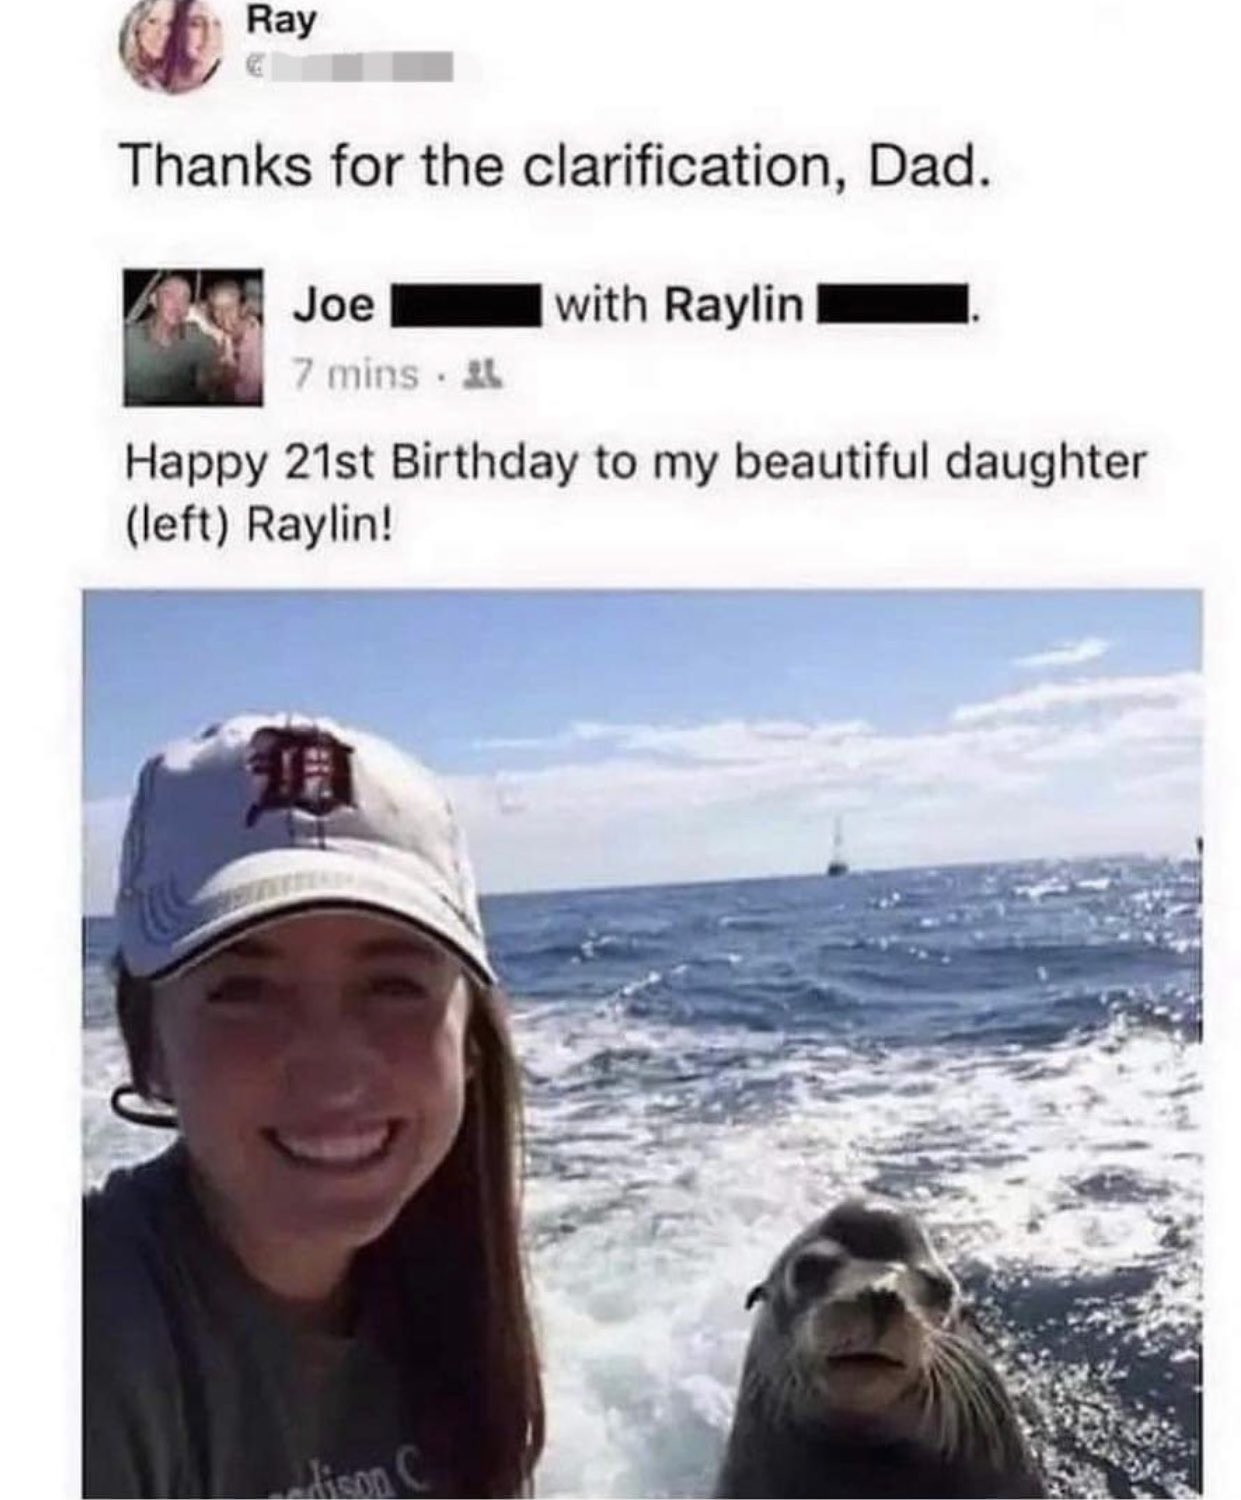 dudes posting their w's - photo caption - Ray Thanks for the clarification, Dad. Joe 7 mins. L with Raylin Happy 21st Birthday to my beautiful daughter left Raylin! dison C